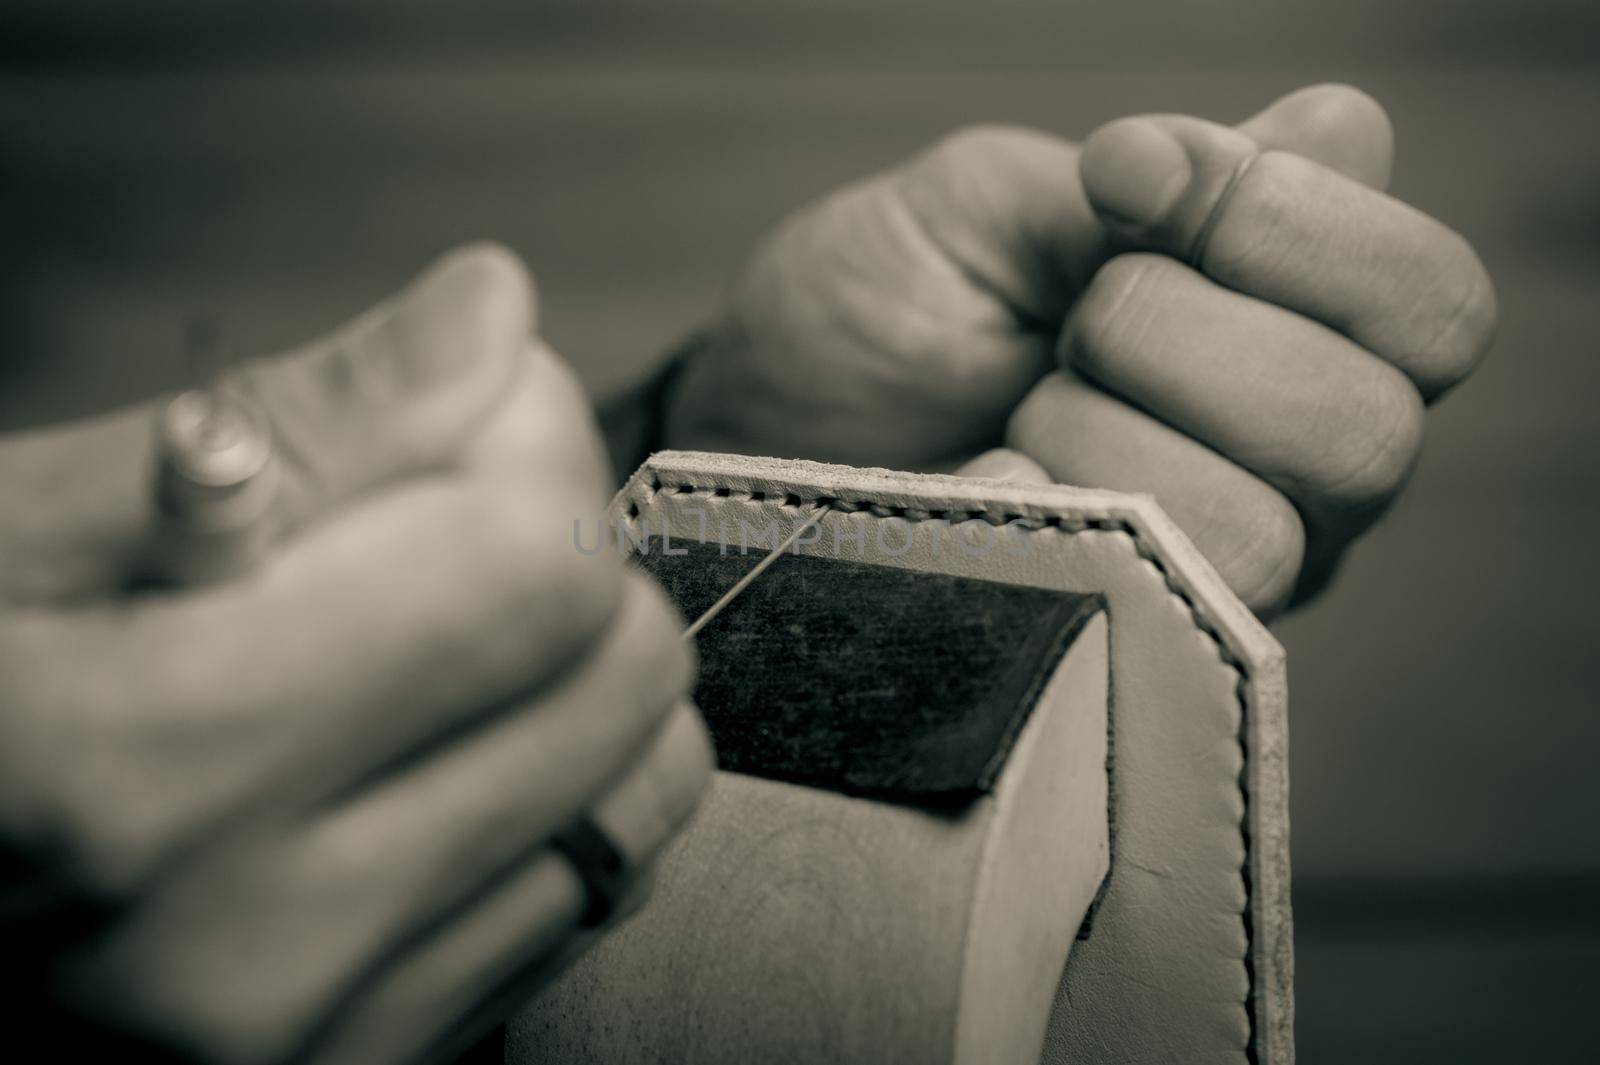 Sewing the vegetable tanned leather by hand. Leather and the craft tools. Monotone and shallow depth of field.